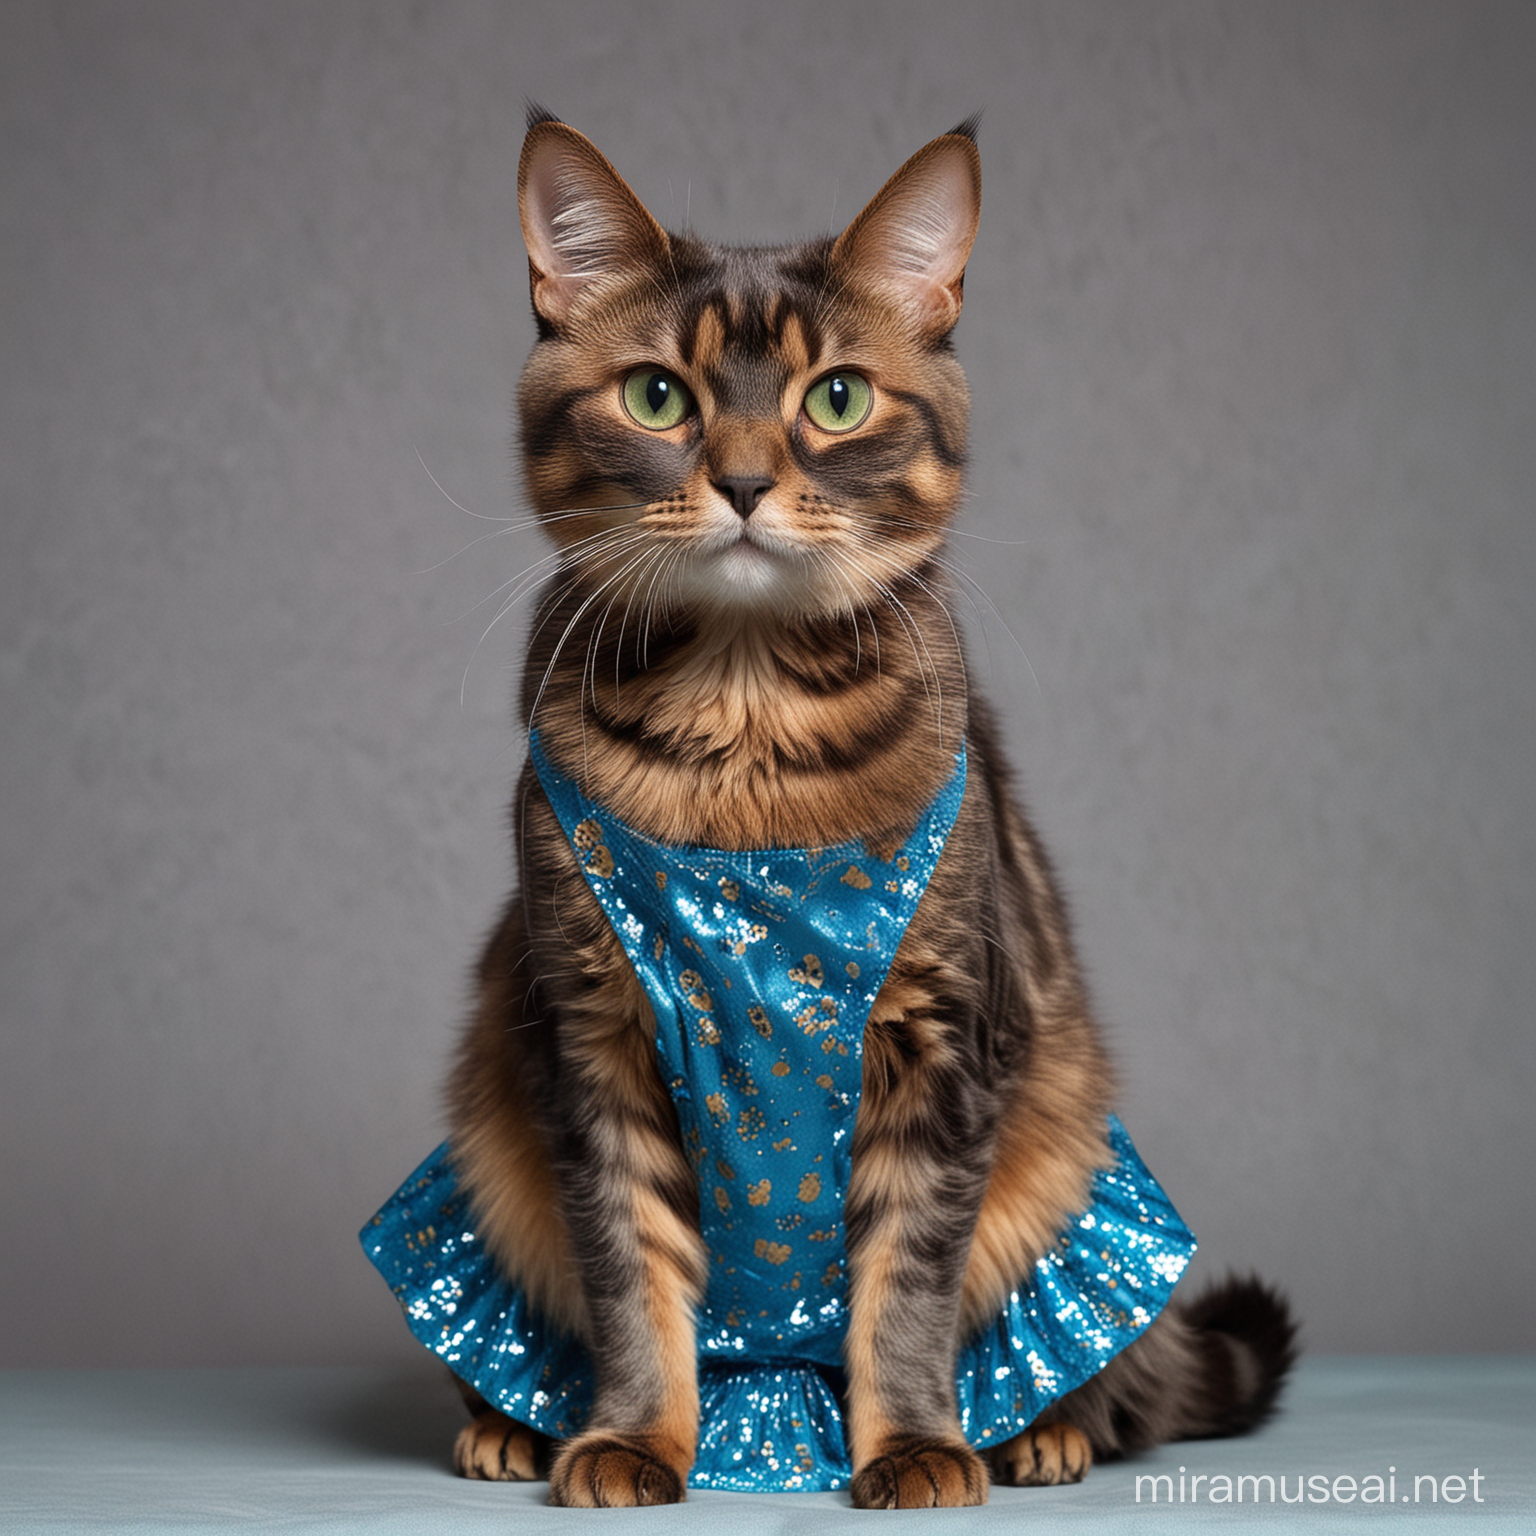 Tortoiseshell Cat Standing in Humanlike Pose with Green Eyes and Blue Shiny Dress